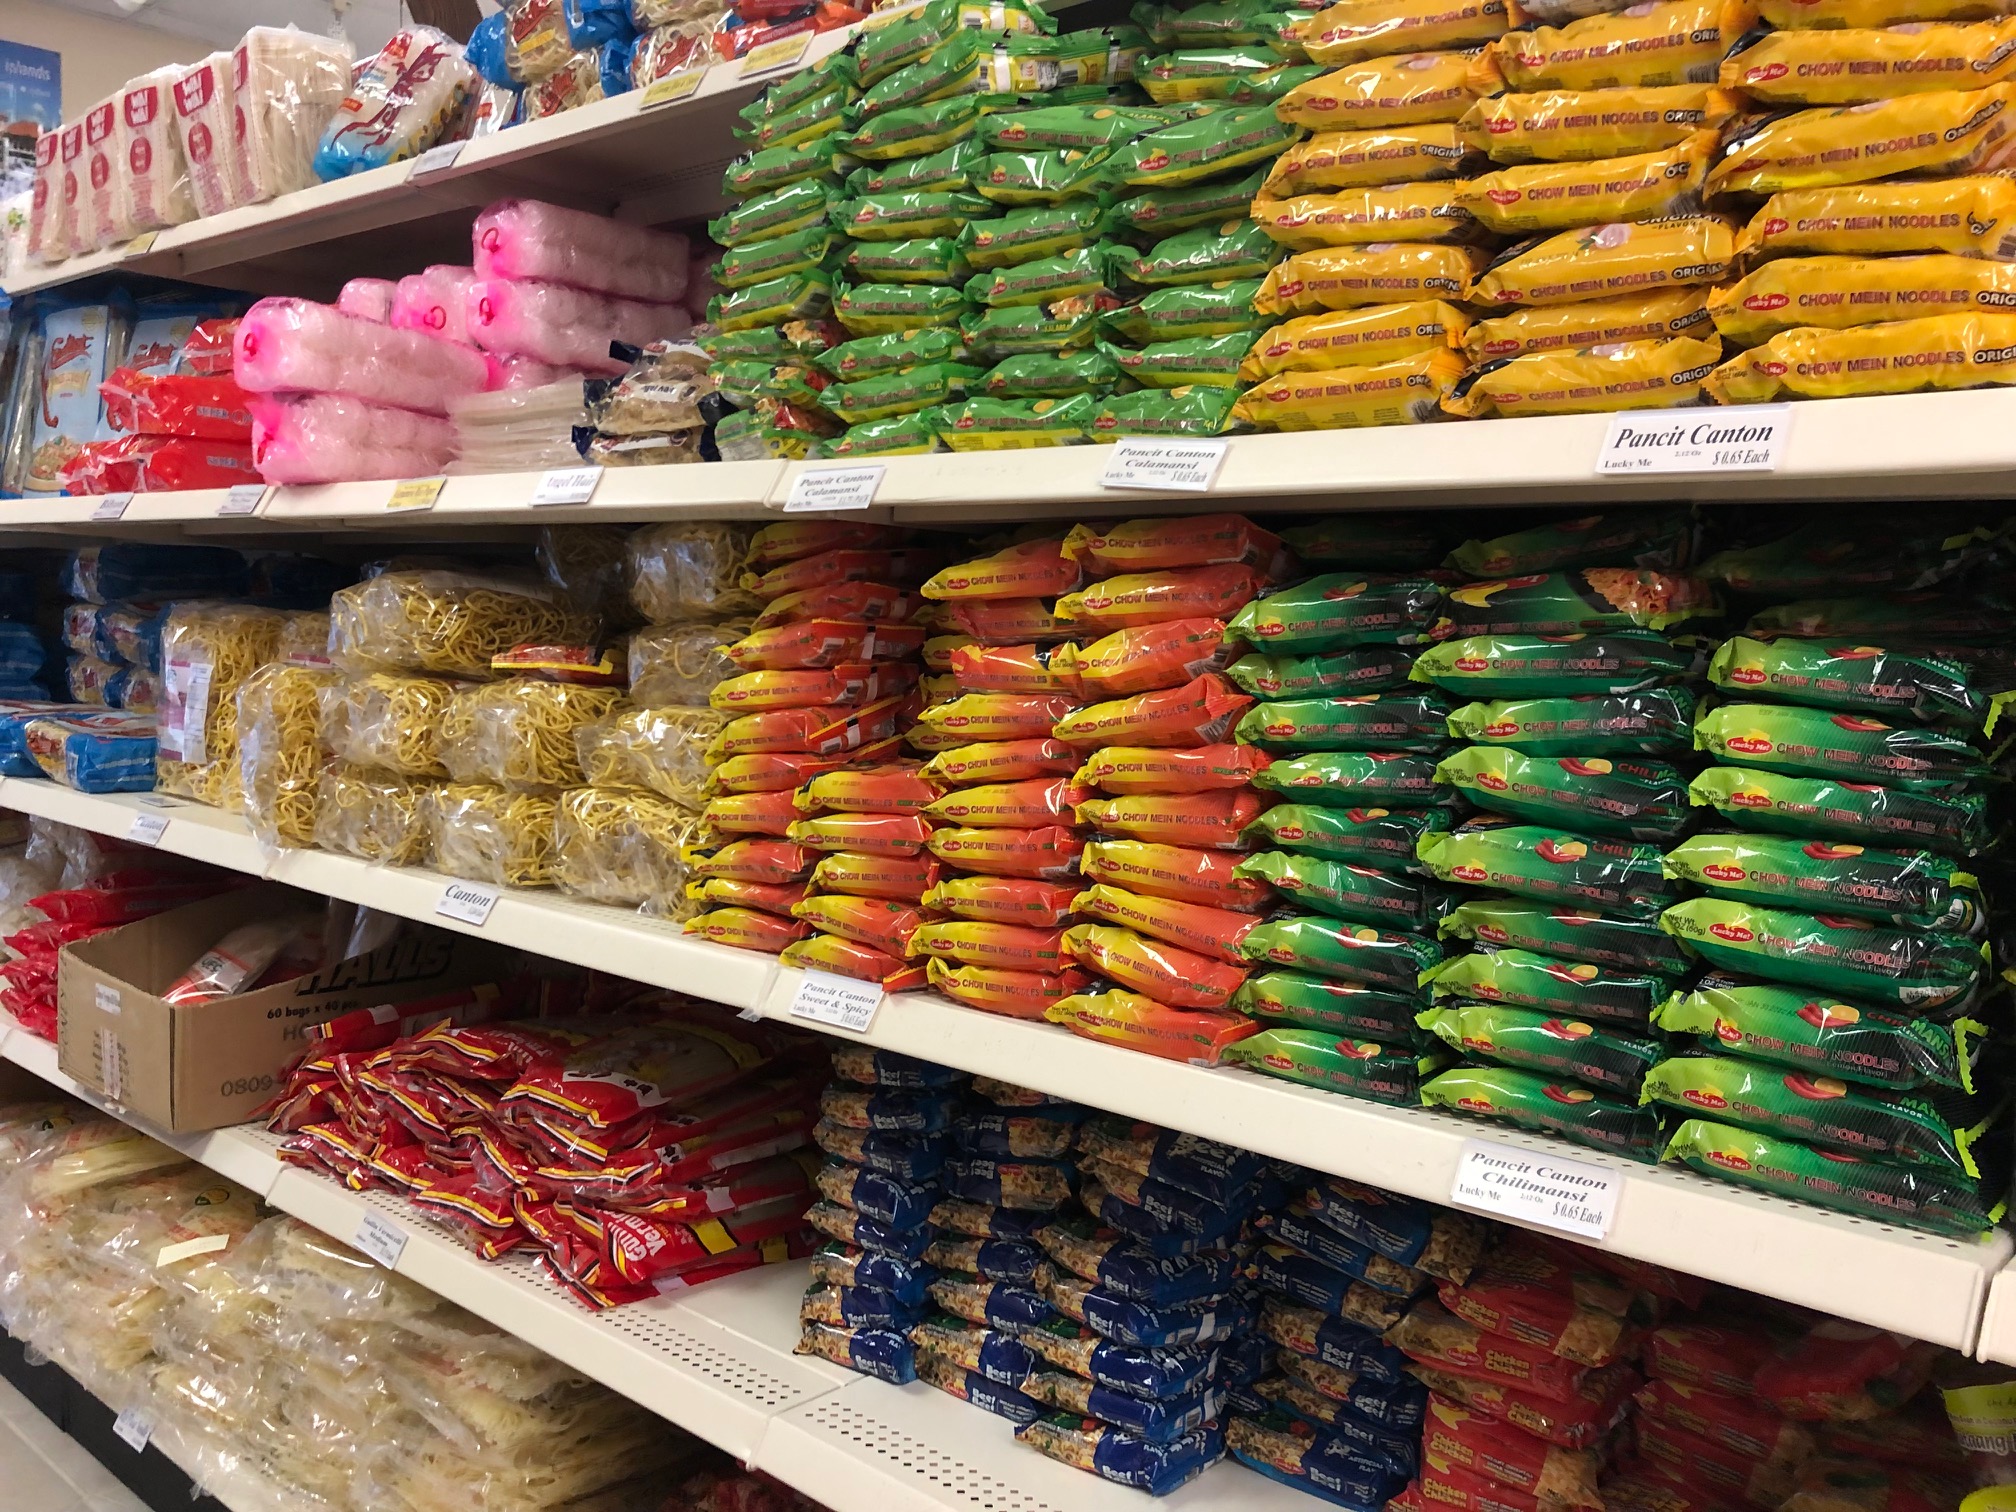 On a shelf inside Maligaya's, there are several stacks of colorful noodle packs. Photo by Alyssa Buckley.